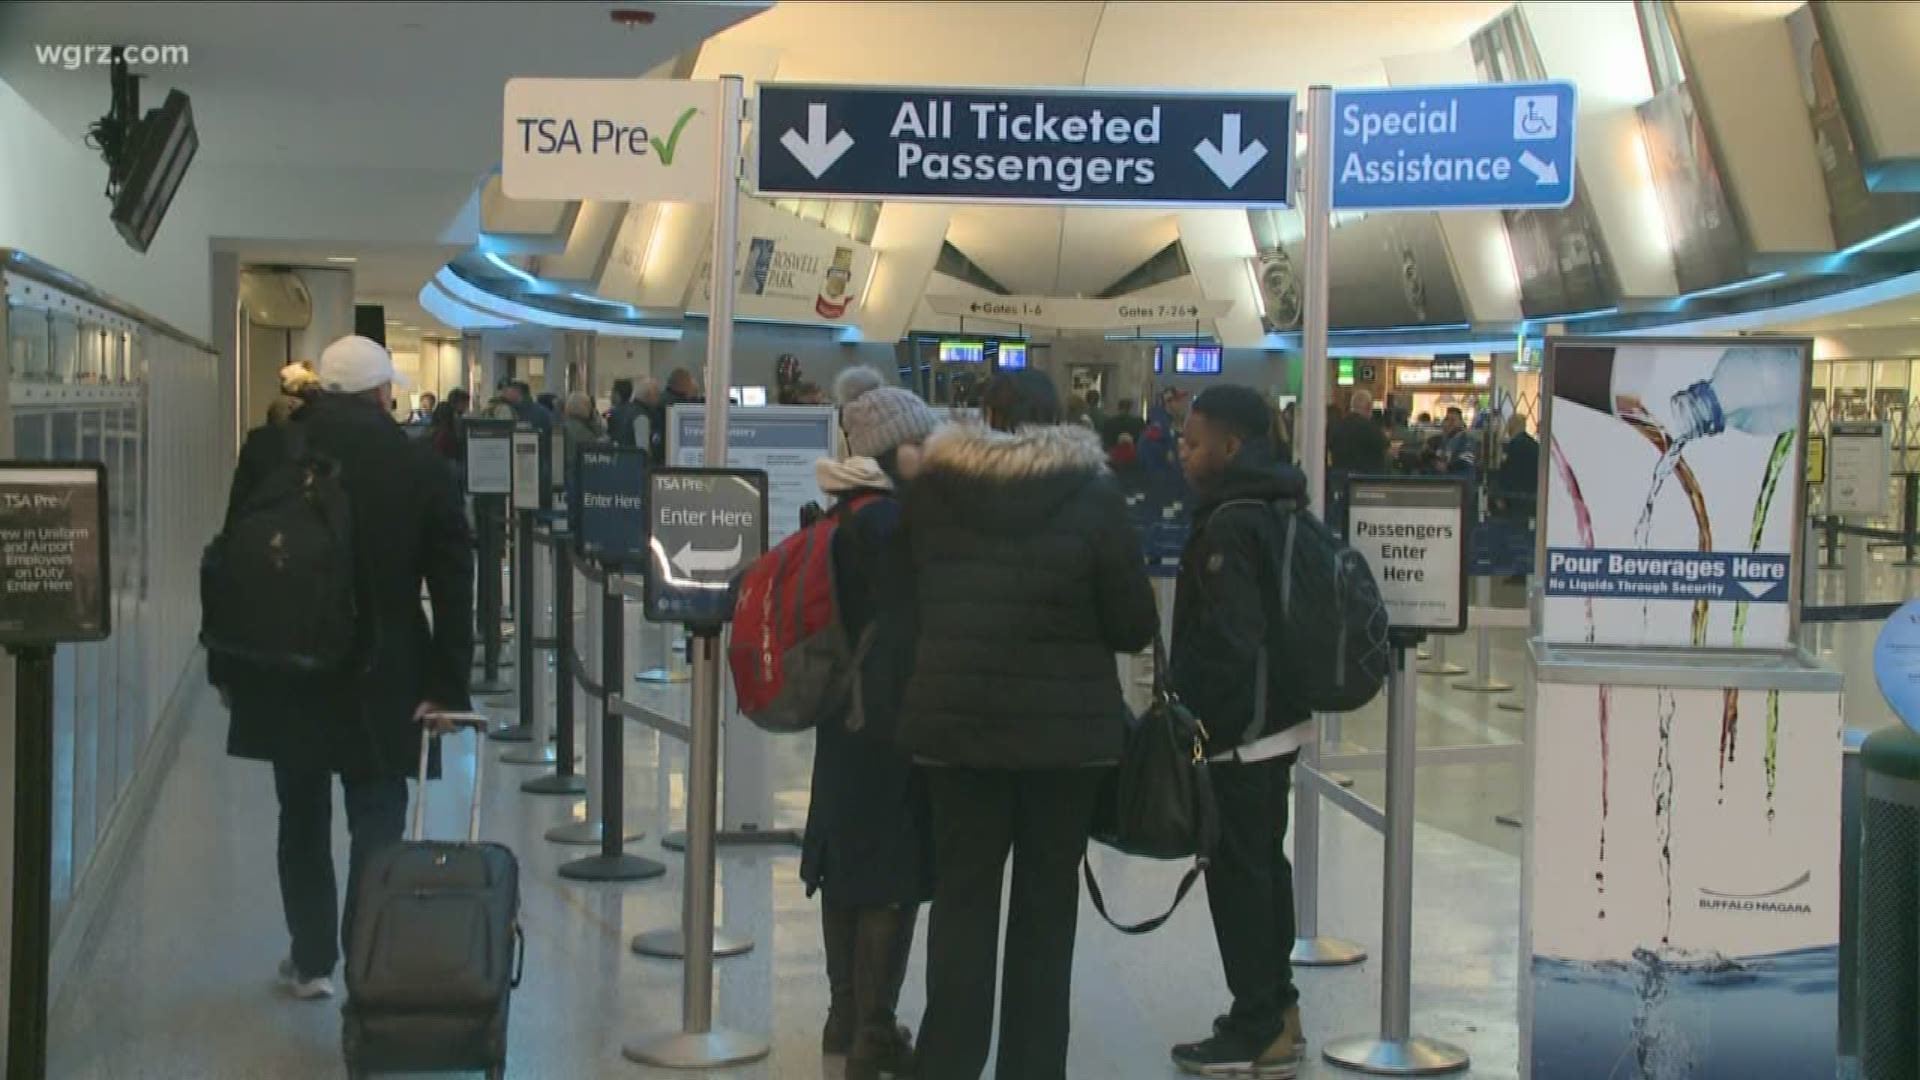 AAA projects this year we could see record-breaking travel numbers both on the road and in the air... About 116 million travelers this year alone.